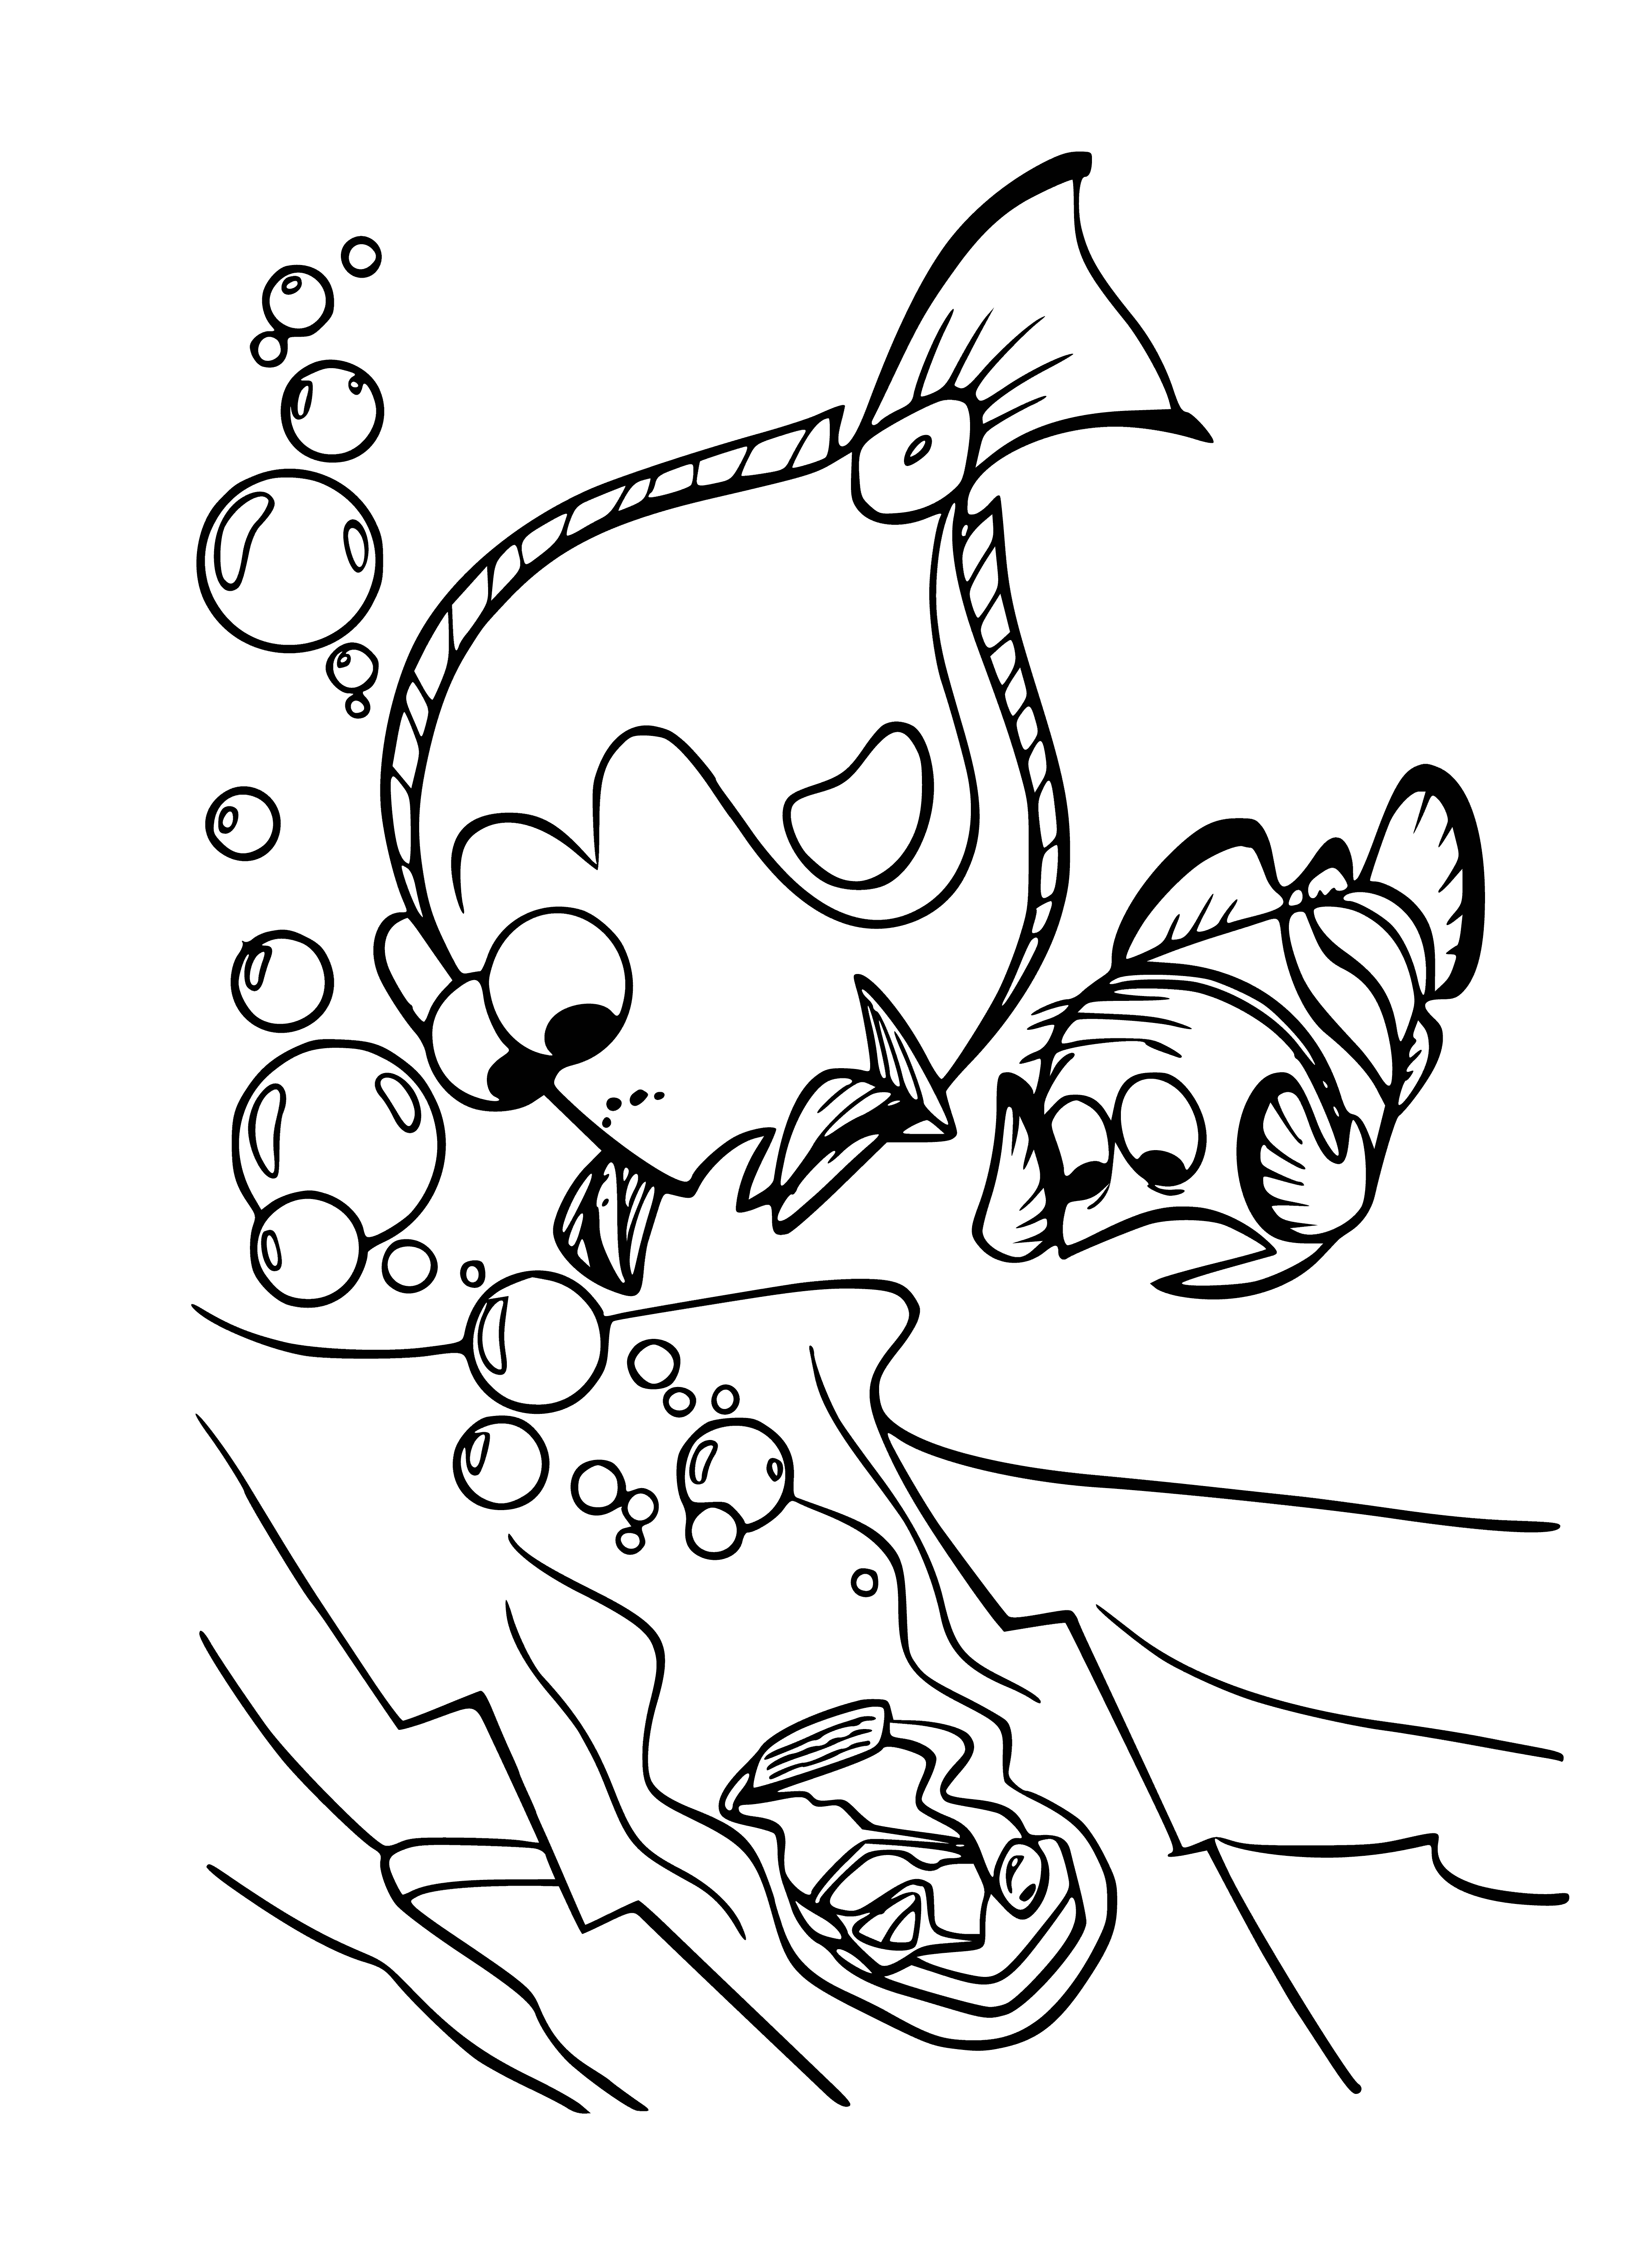 coloring page: Diver removes orange mask, revealing wet brown hair, beard & closed eyes.